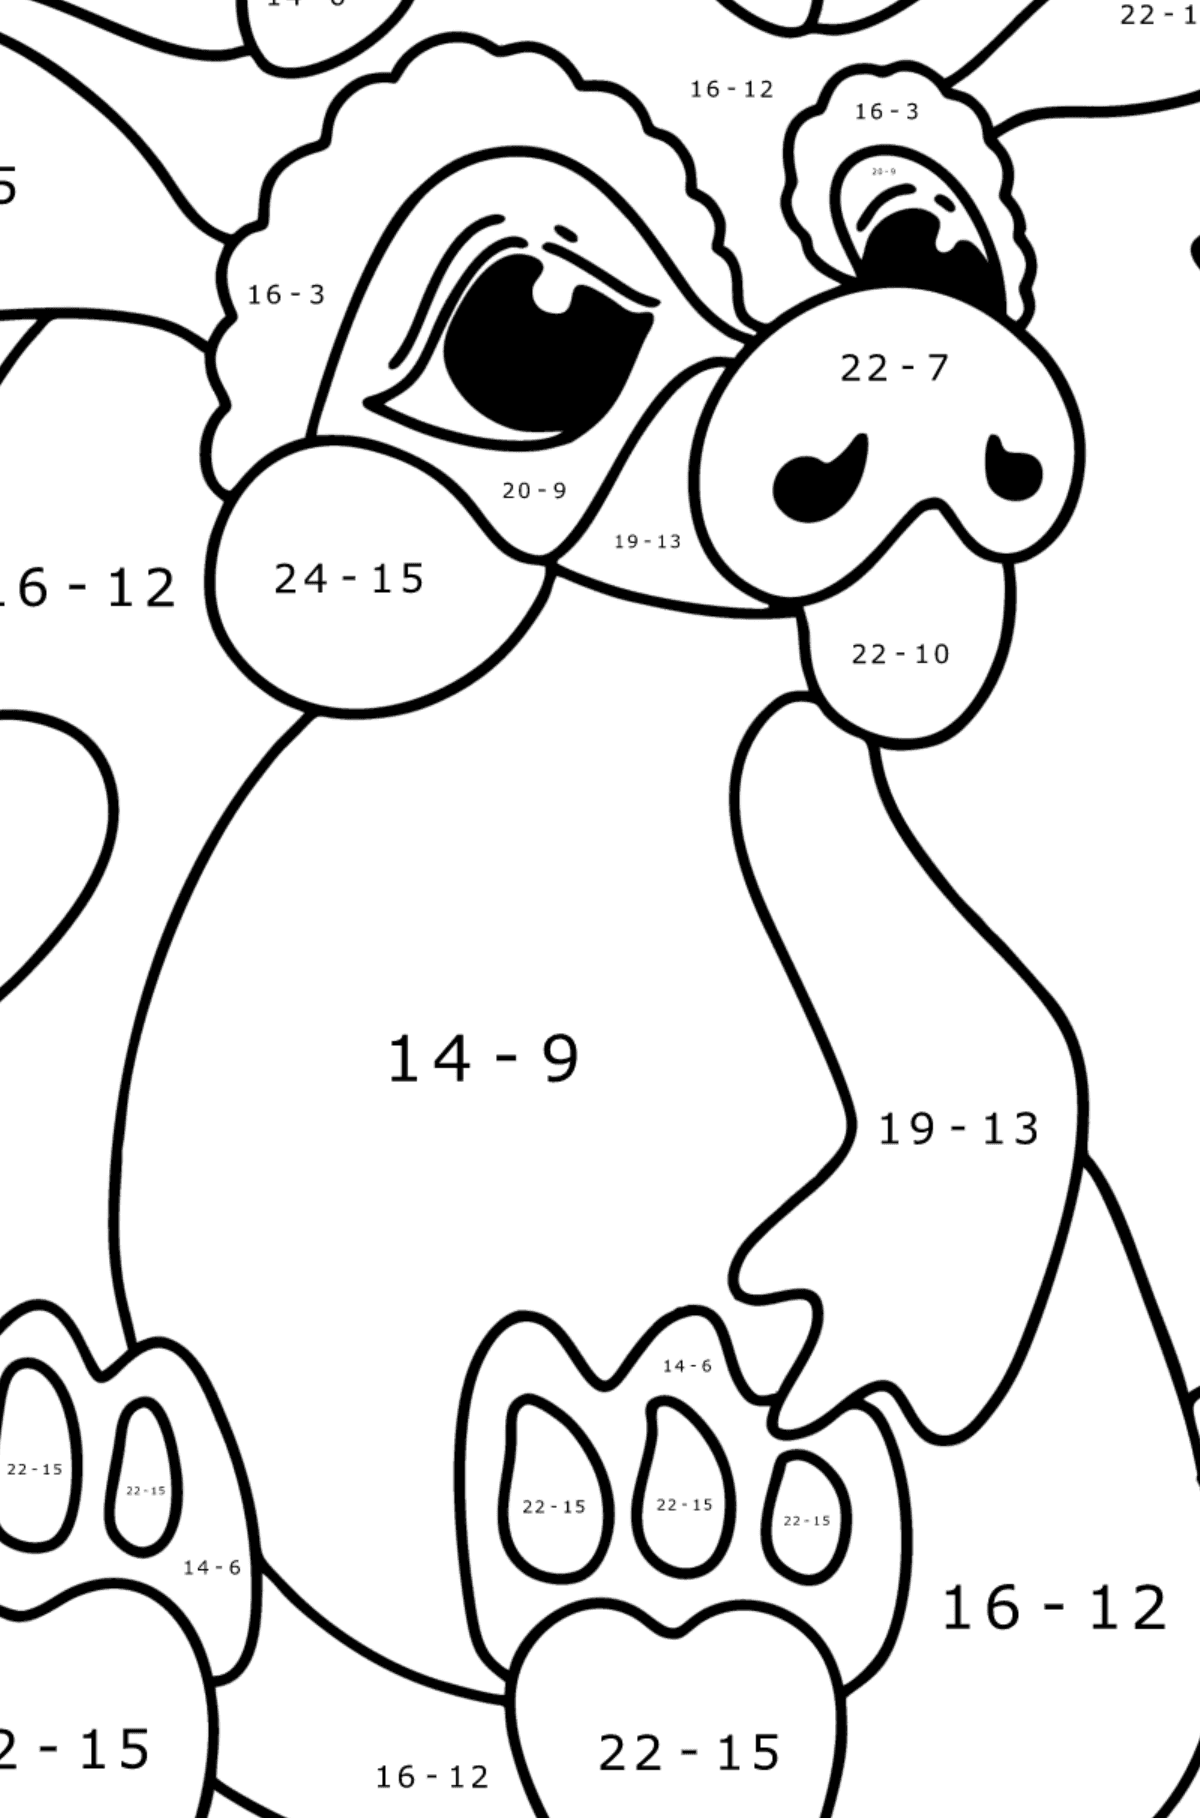 Dreamy dragon coloring page - Math Coloring - Subtraction for Kids